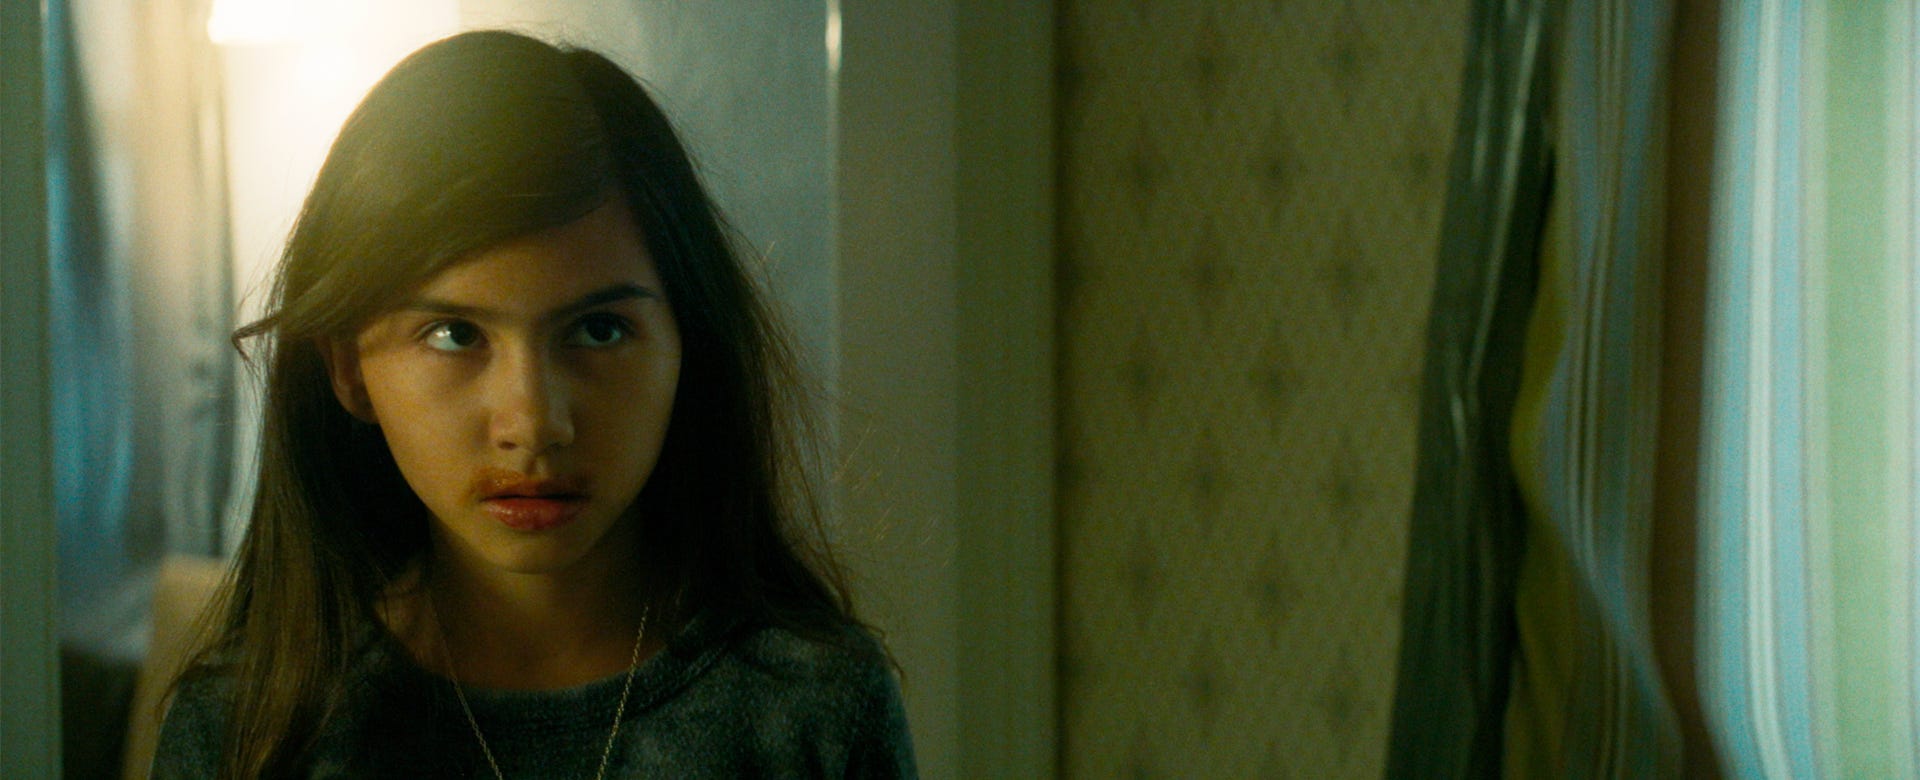 Let the Right One In Cast on Showtime - Madison Taylor Baez as Eleanor Kane